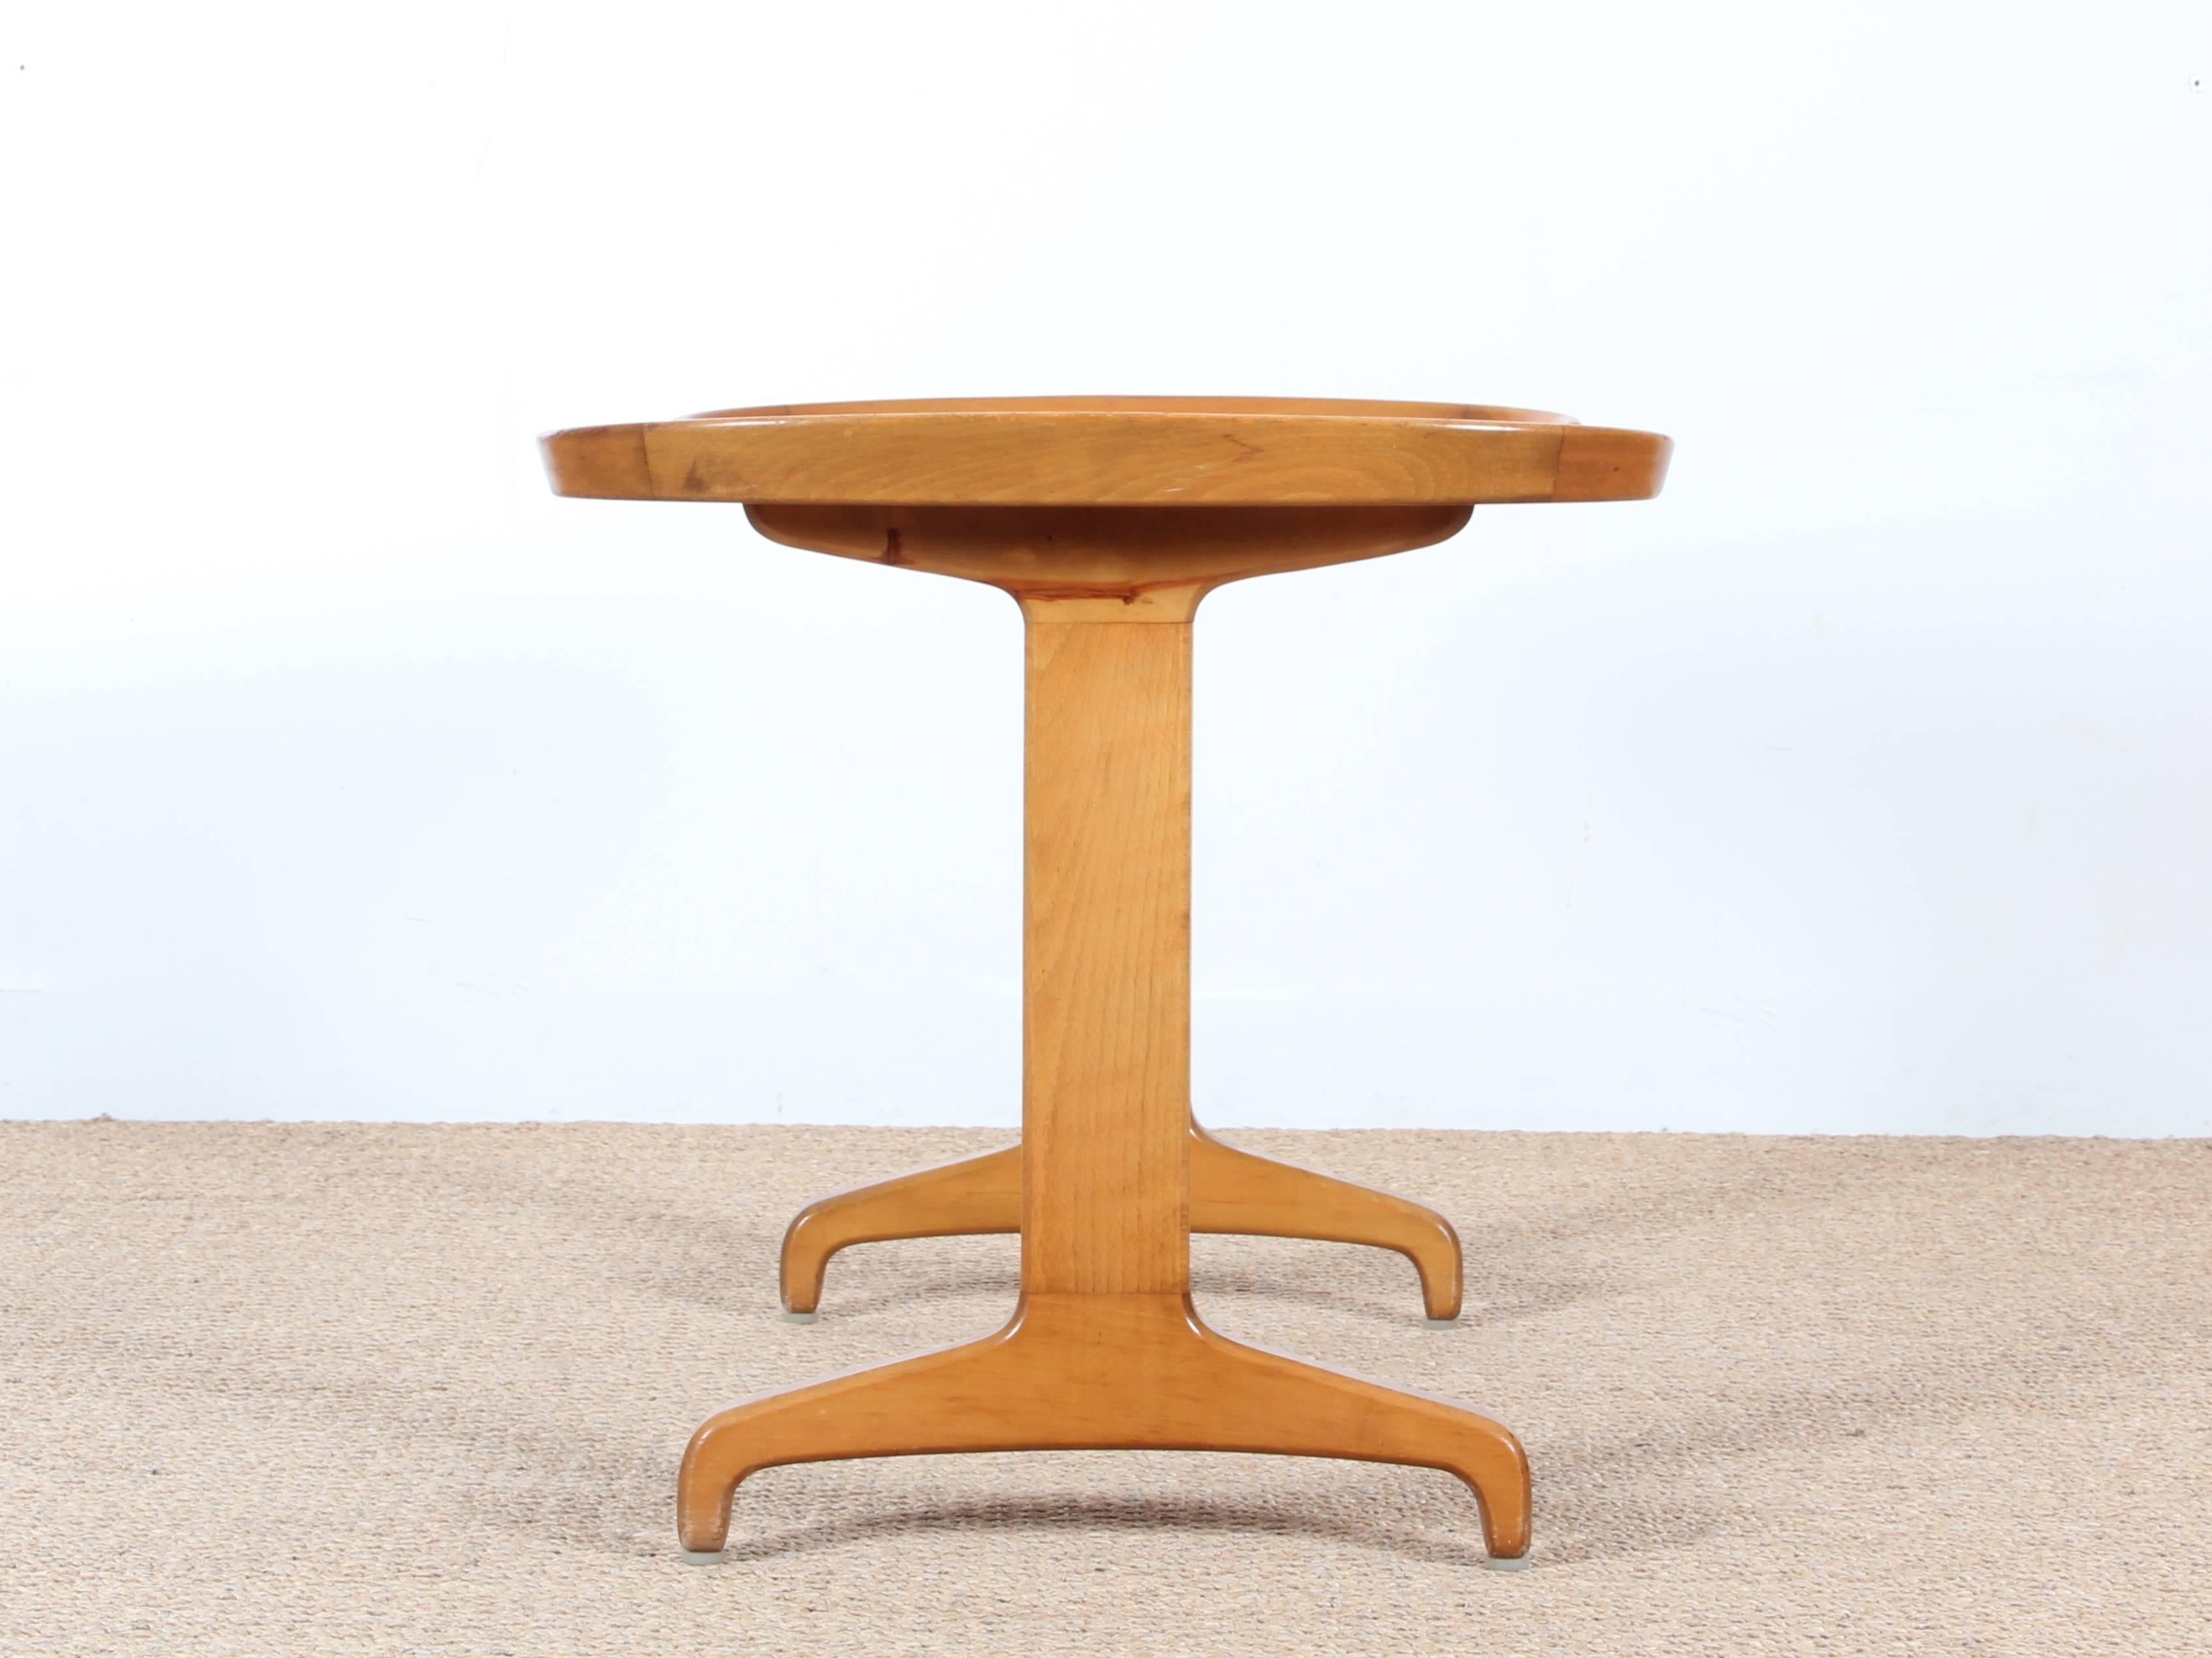 Mid-Century Modern coffee table in in walnut and mahogany. Made in the 1960s.